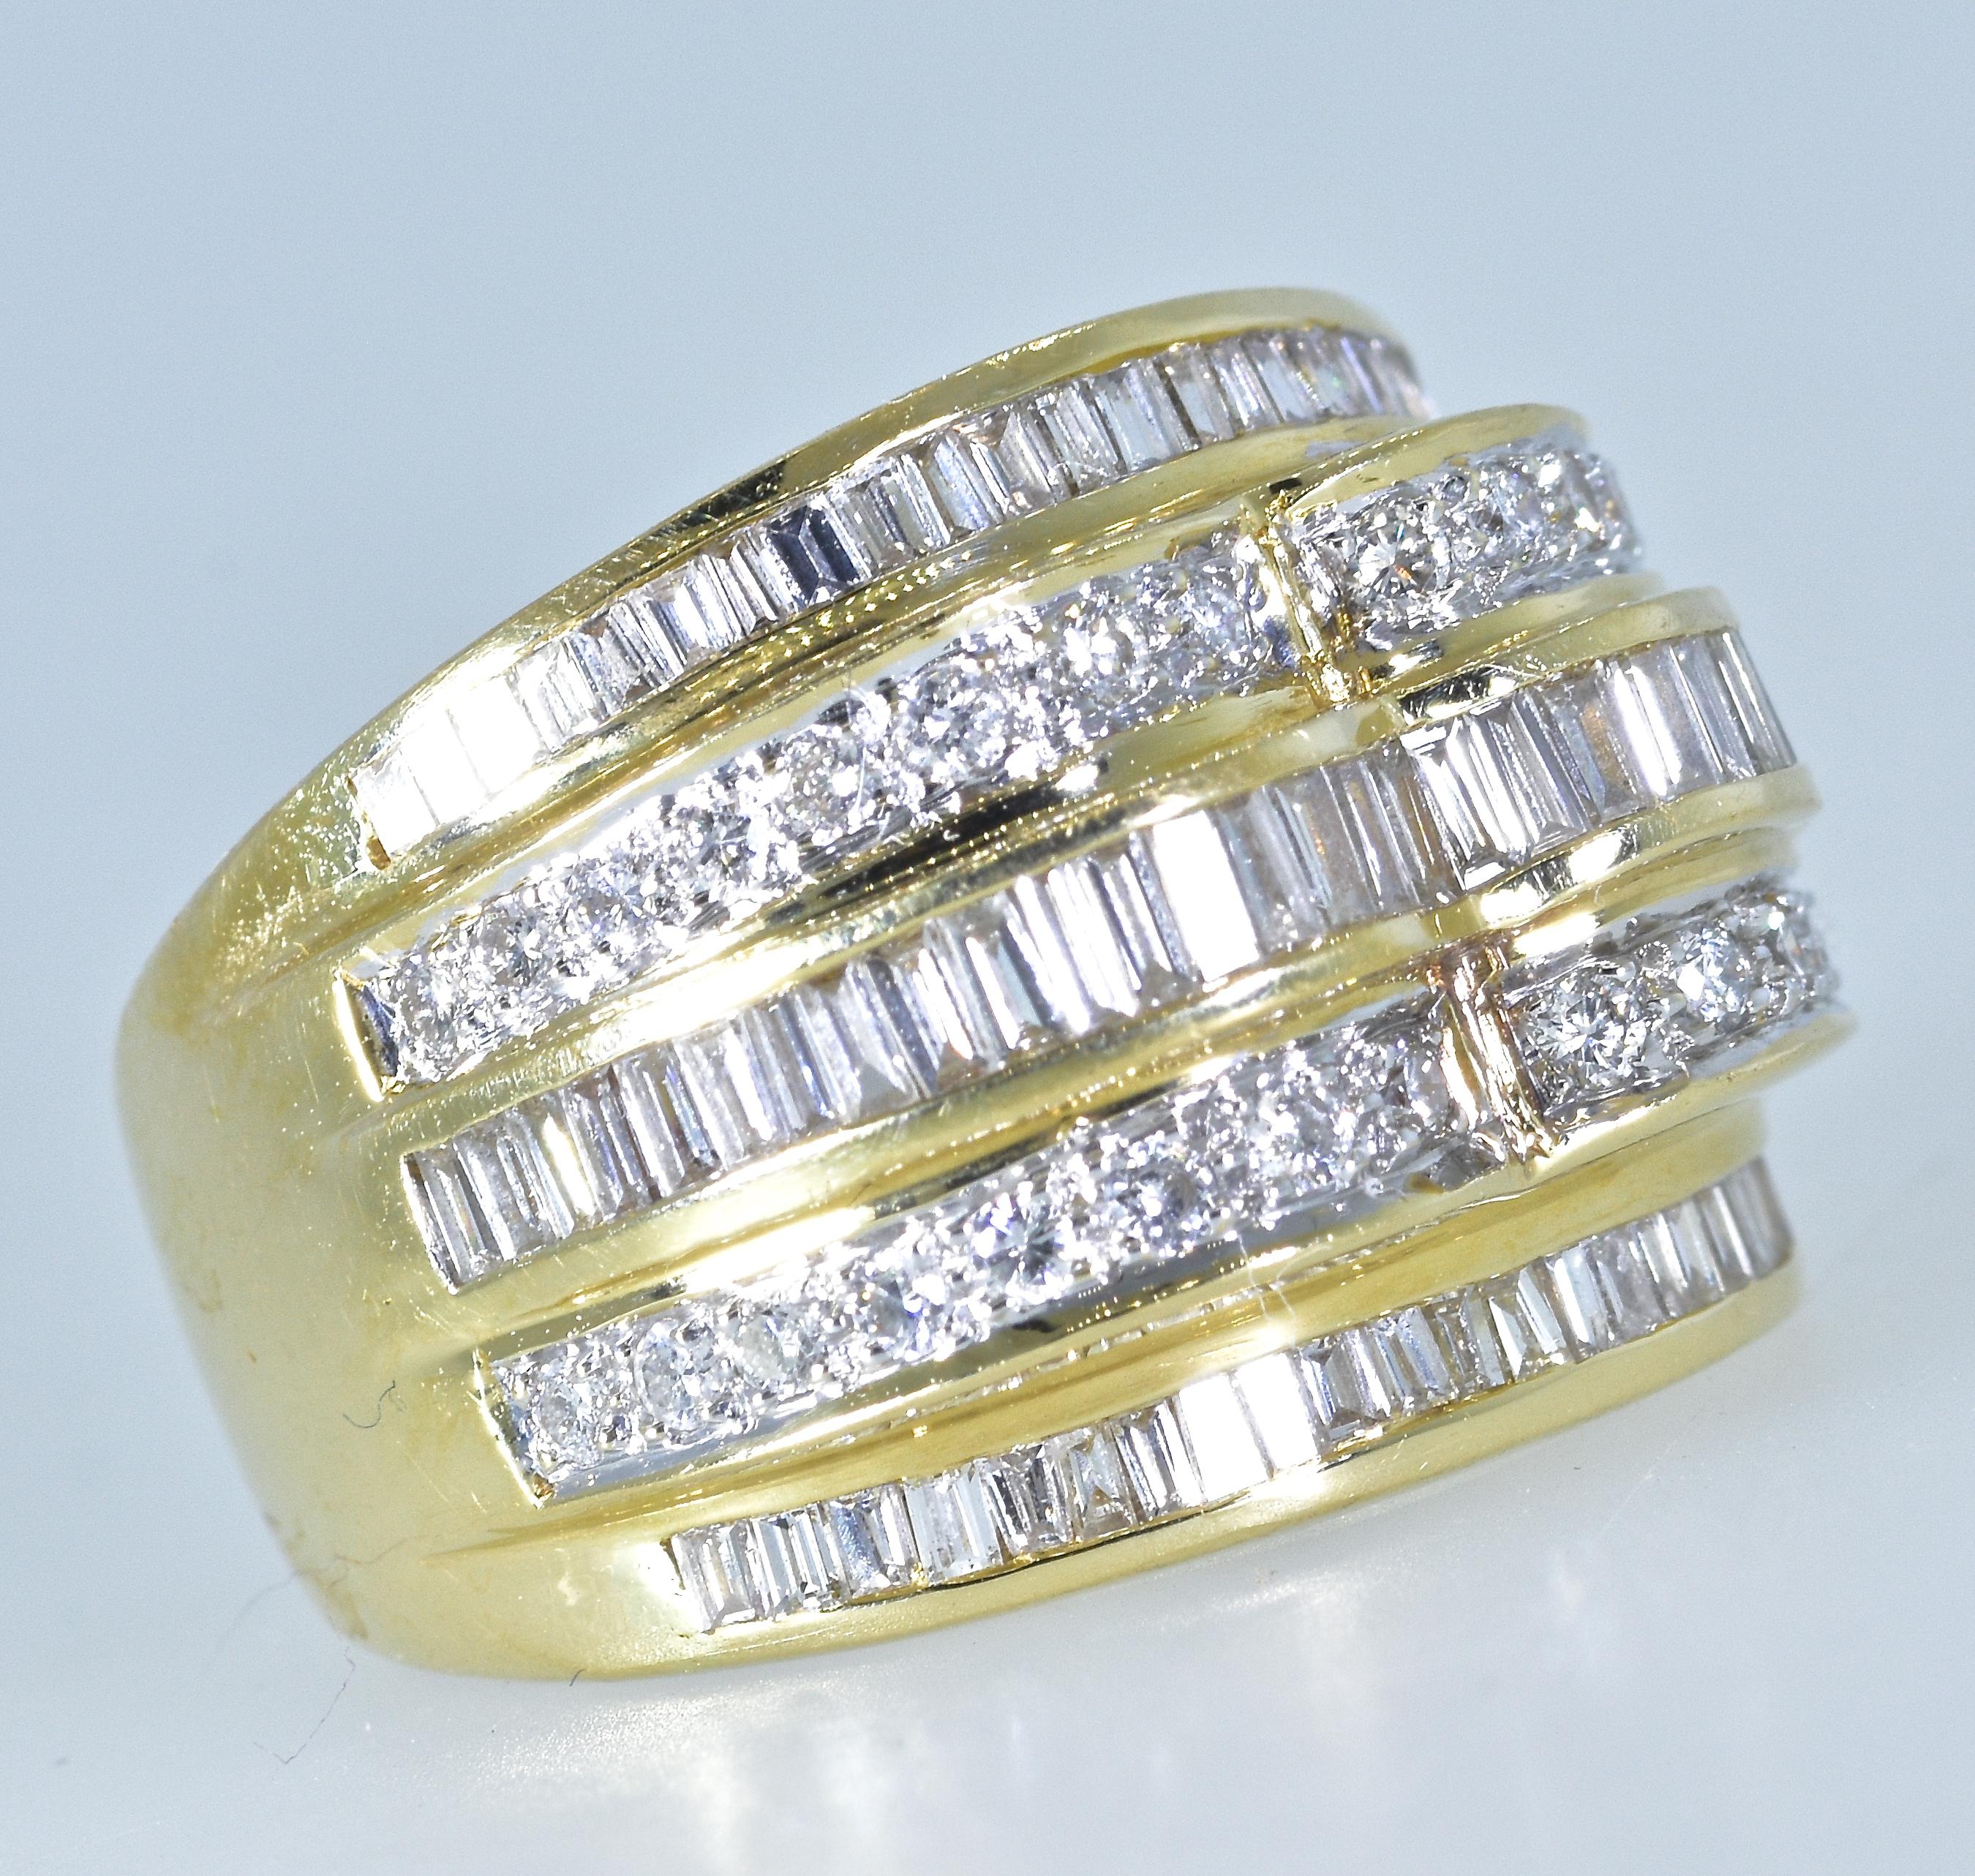 Diamond ring in 18K yellow gold, there are slightly graduating round brilliant cut  and baguette (both tapered and straight baguettes) cut diamonds set in this well made 18K ring.  All of these diamonds are near colorless (H/I) and slightly